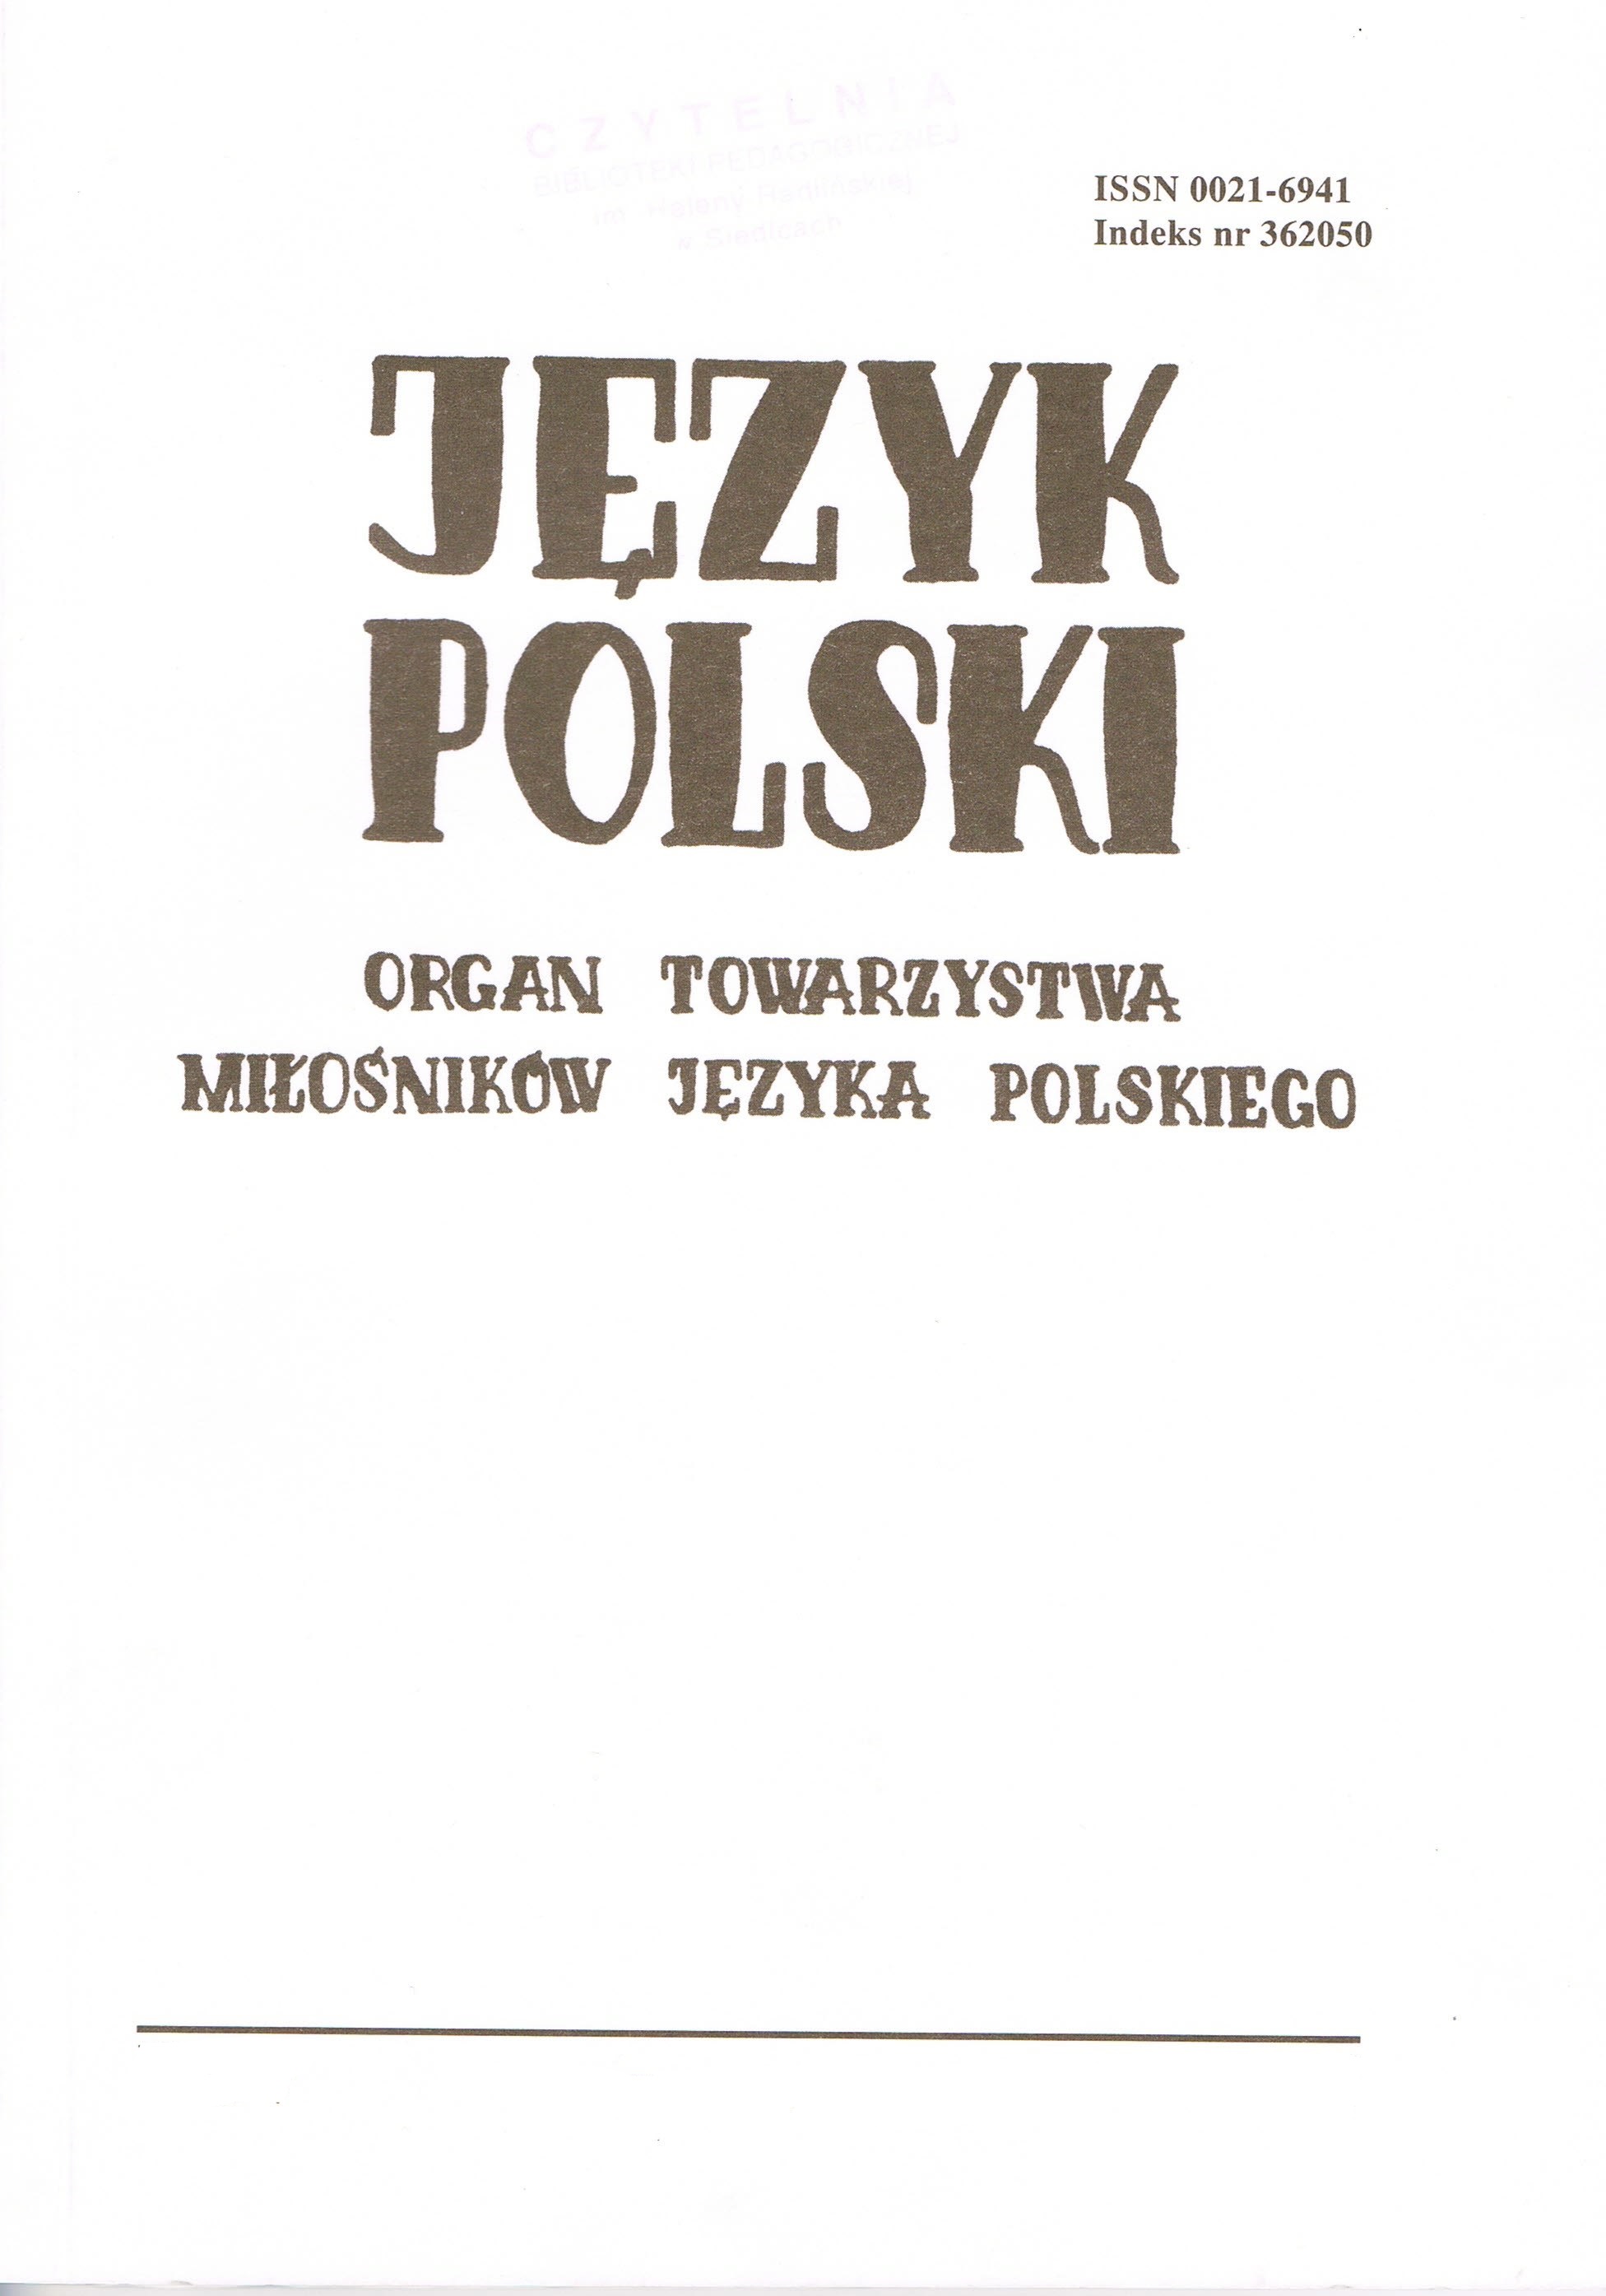 "Prikaz", "power" and "Gdynia Festiwal" Cover Image